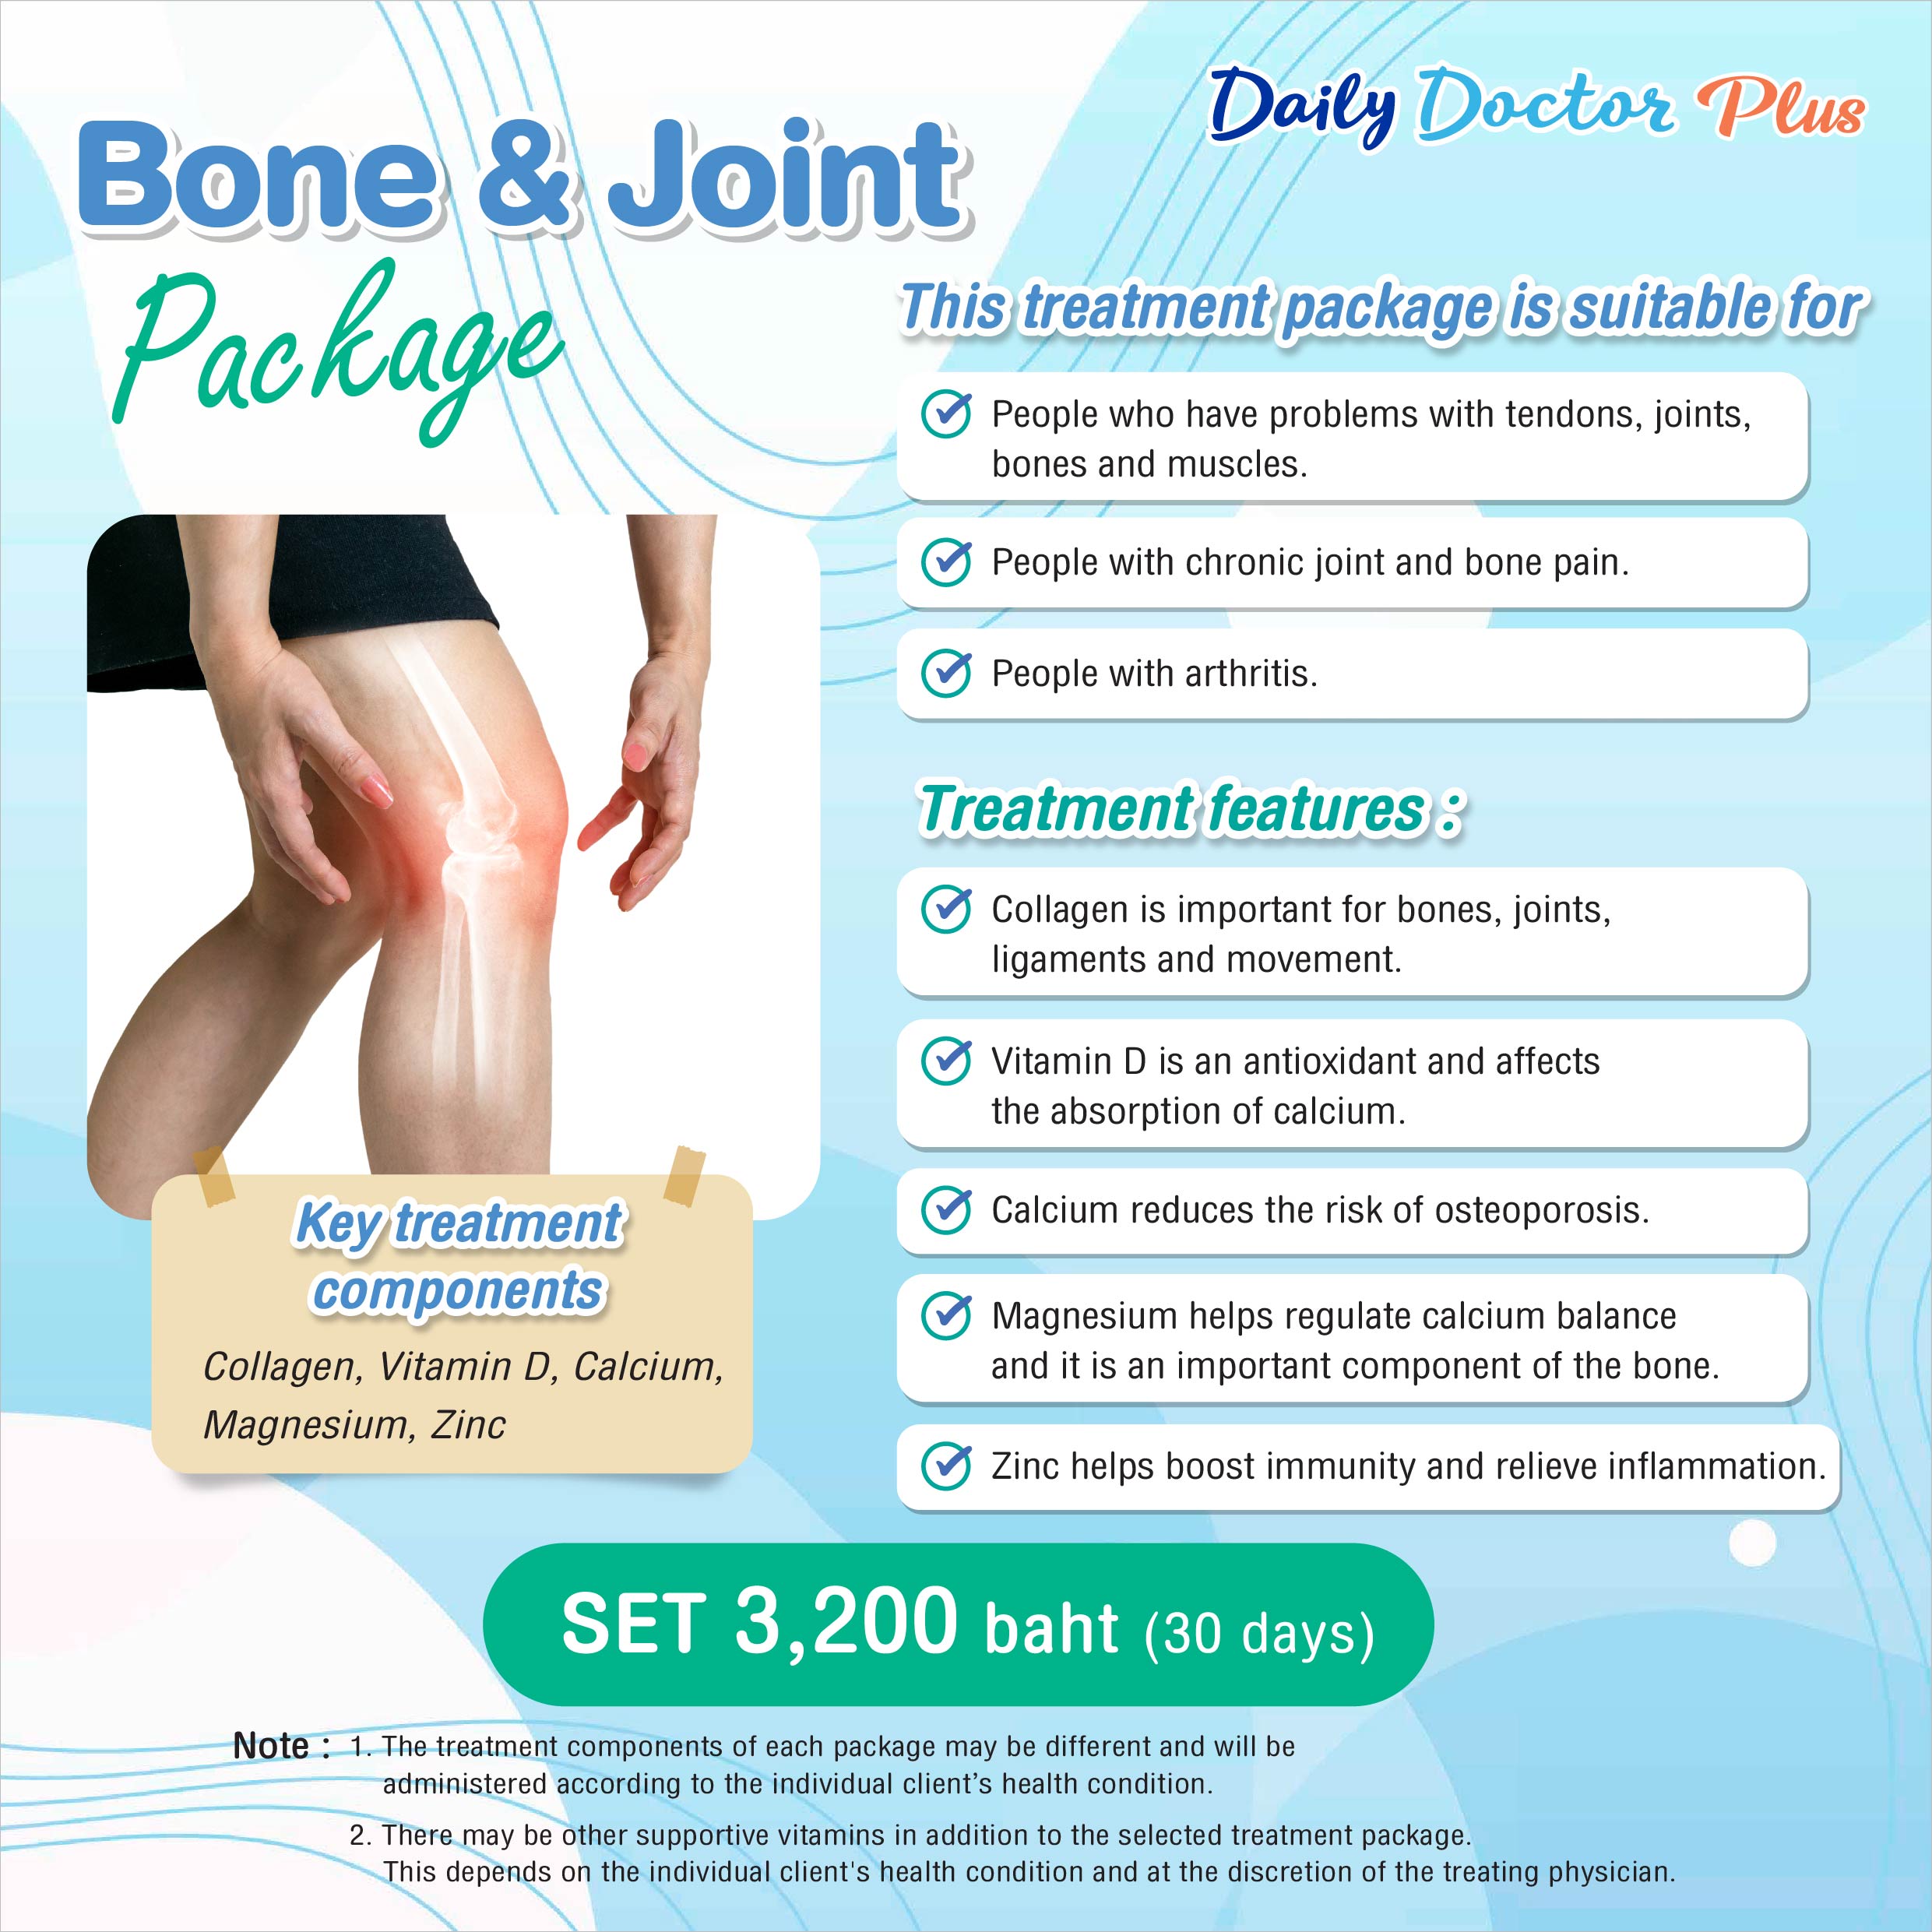 Daily Doctor Plus : Bone & Joint